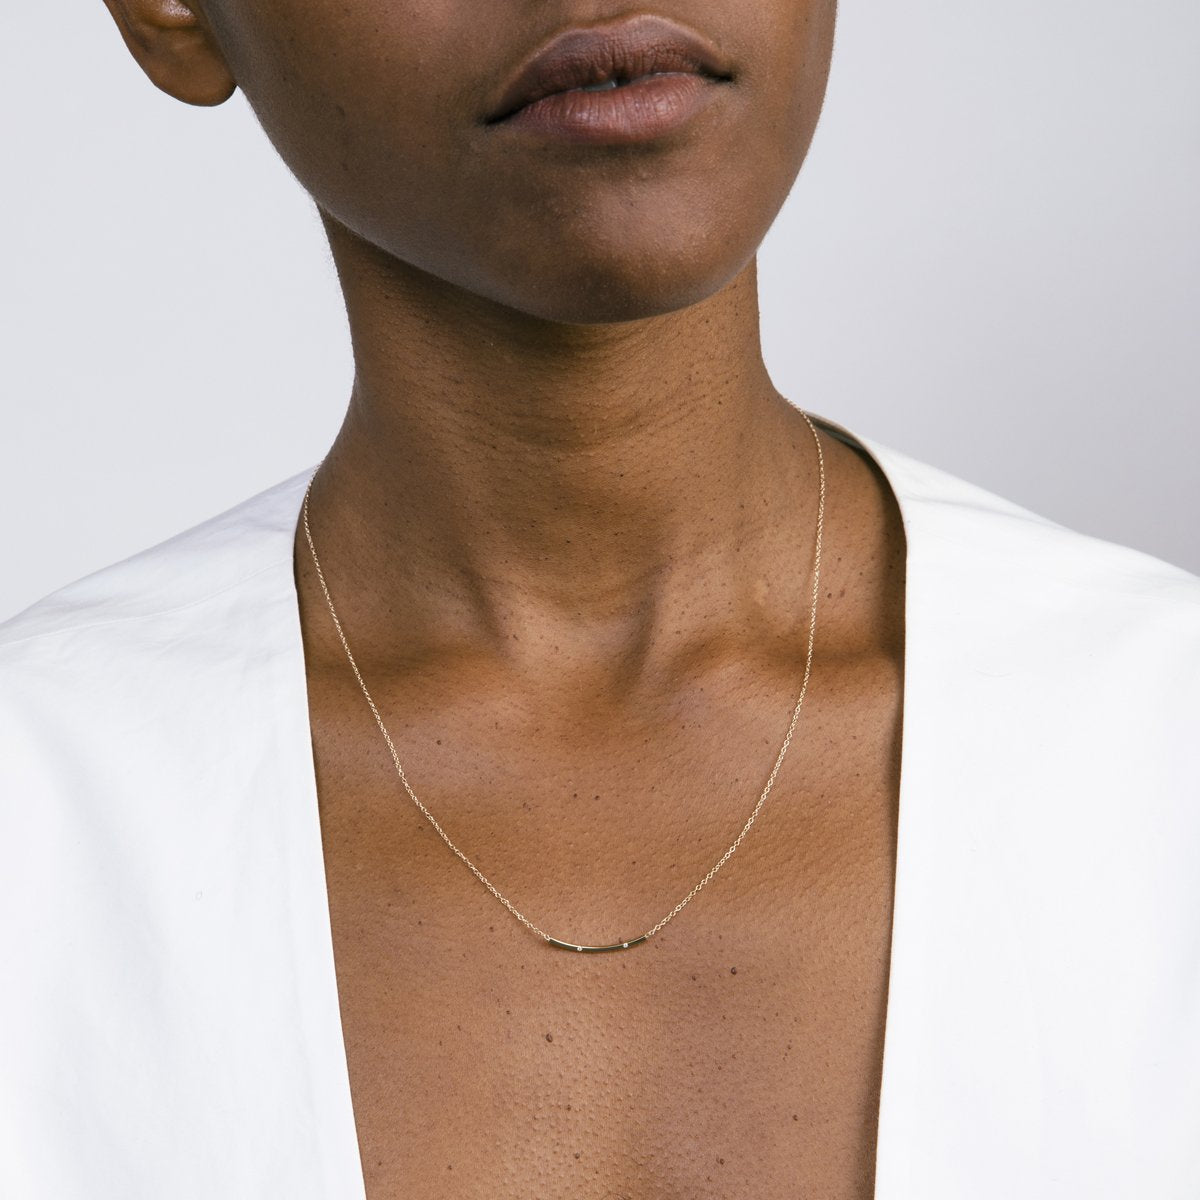 Sara Thin Necklace in 14k Gold set with White Diamonds By SHW Fine Jewelry NYC